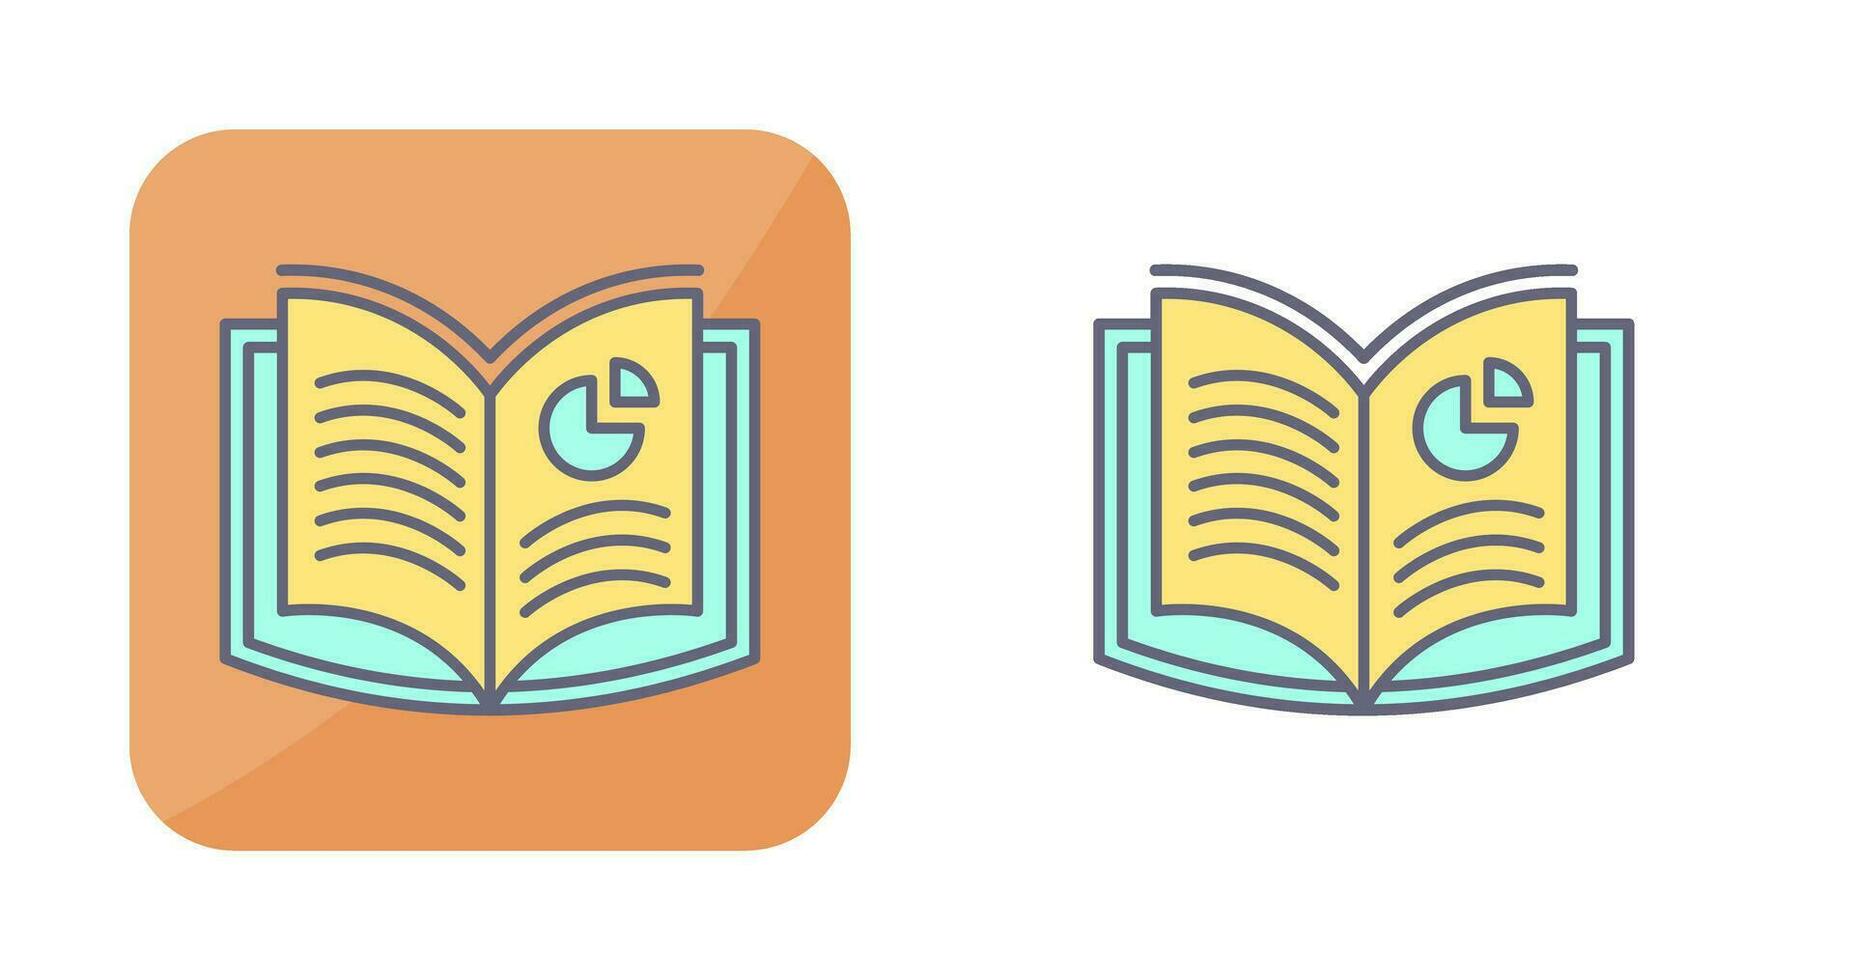 Home Work Vector Icon